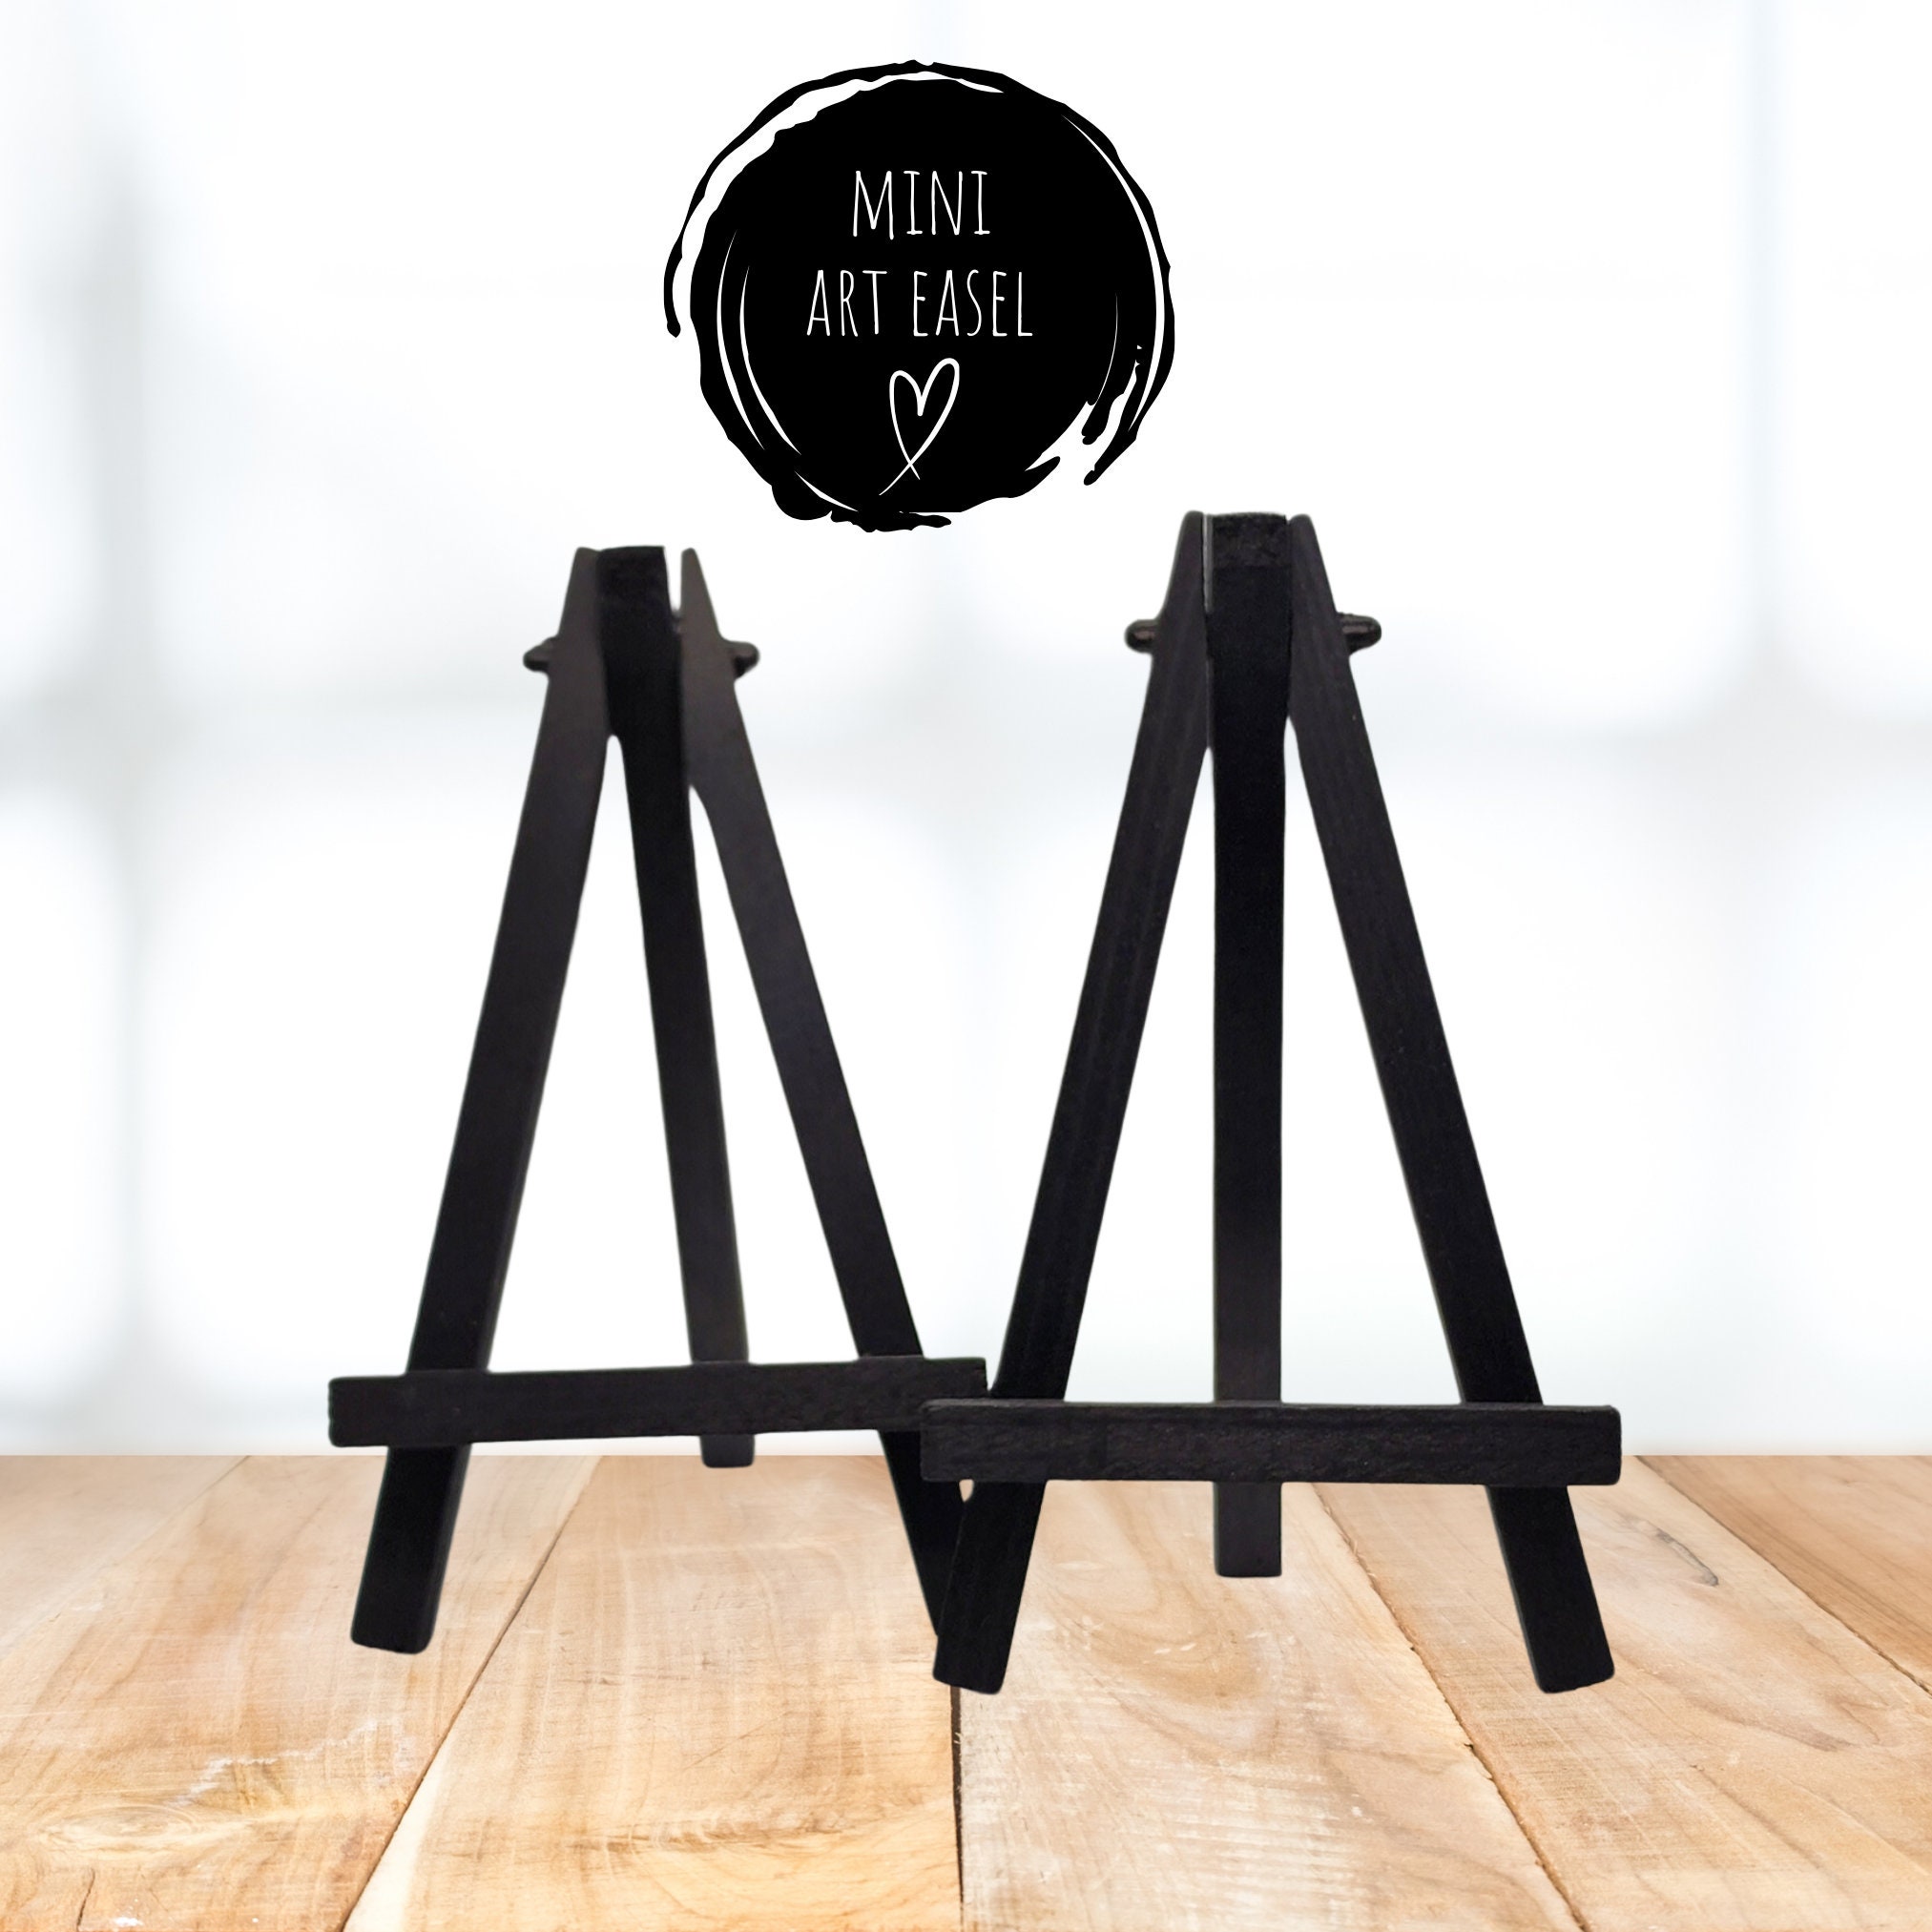 20 Large Natural Wood Display Stand A-Frame Artist Easel, 2 Pack -  Adjustable Wooden Tripod Tabletop Holder Stand for Canvas, Painting Party,  Signs